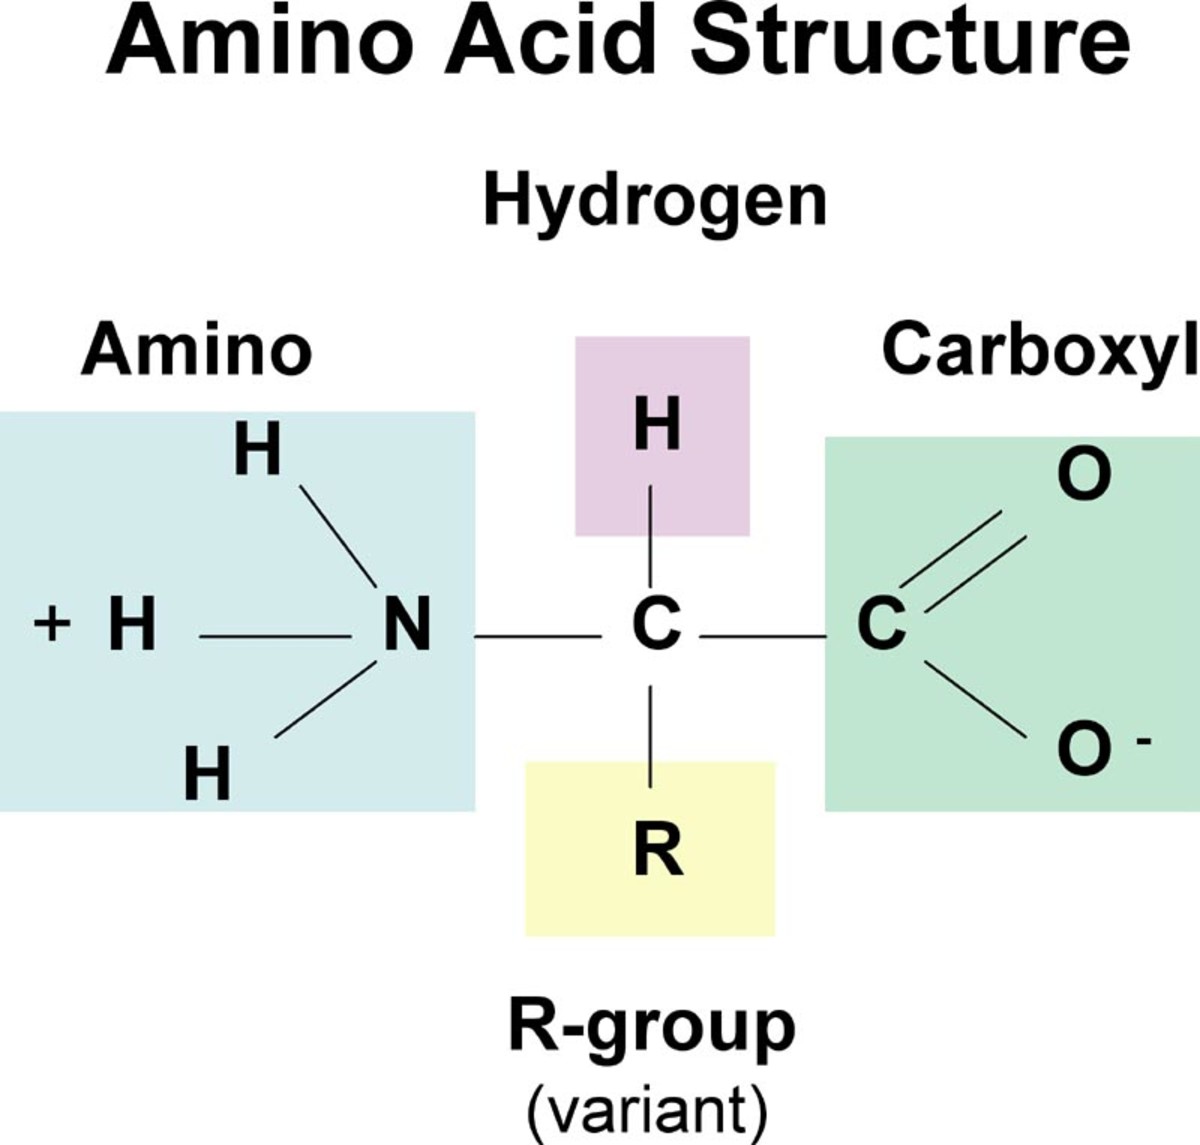 Proteins and Amino Acids - The Basics